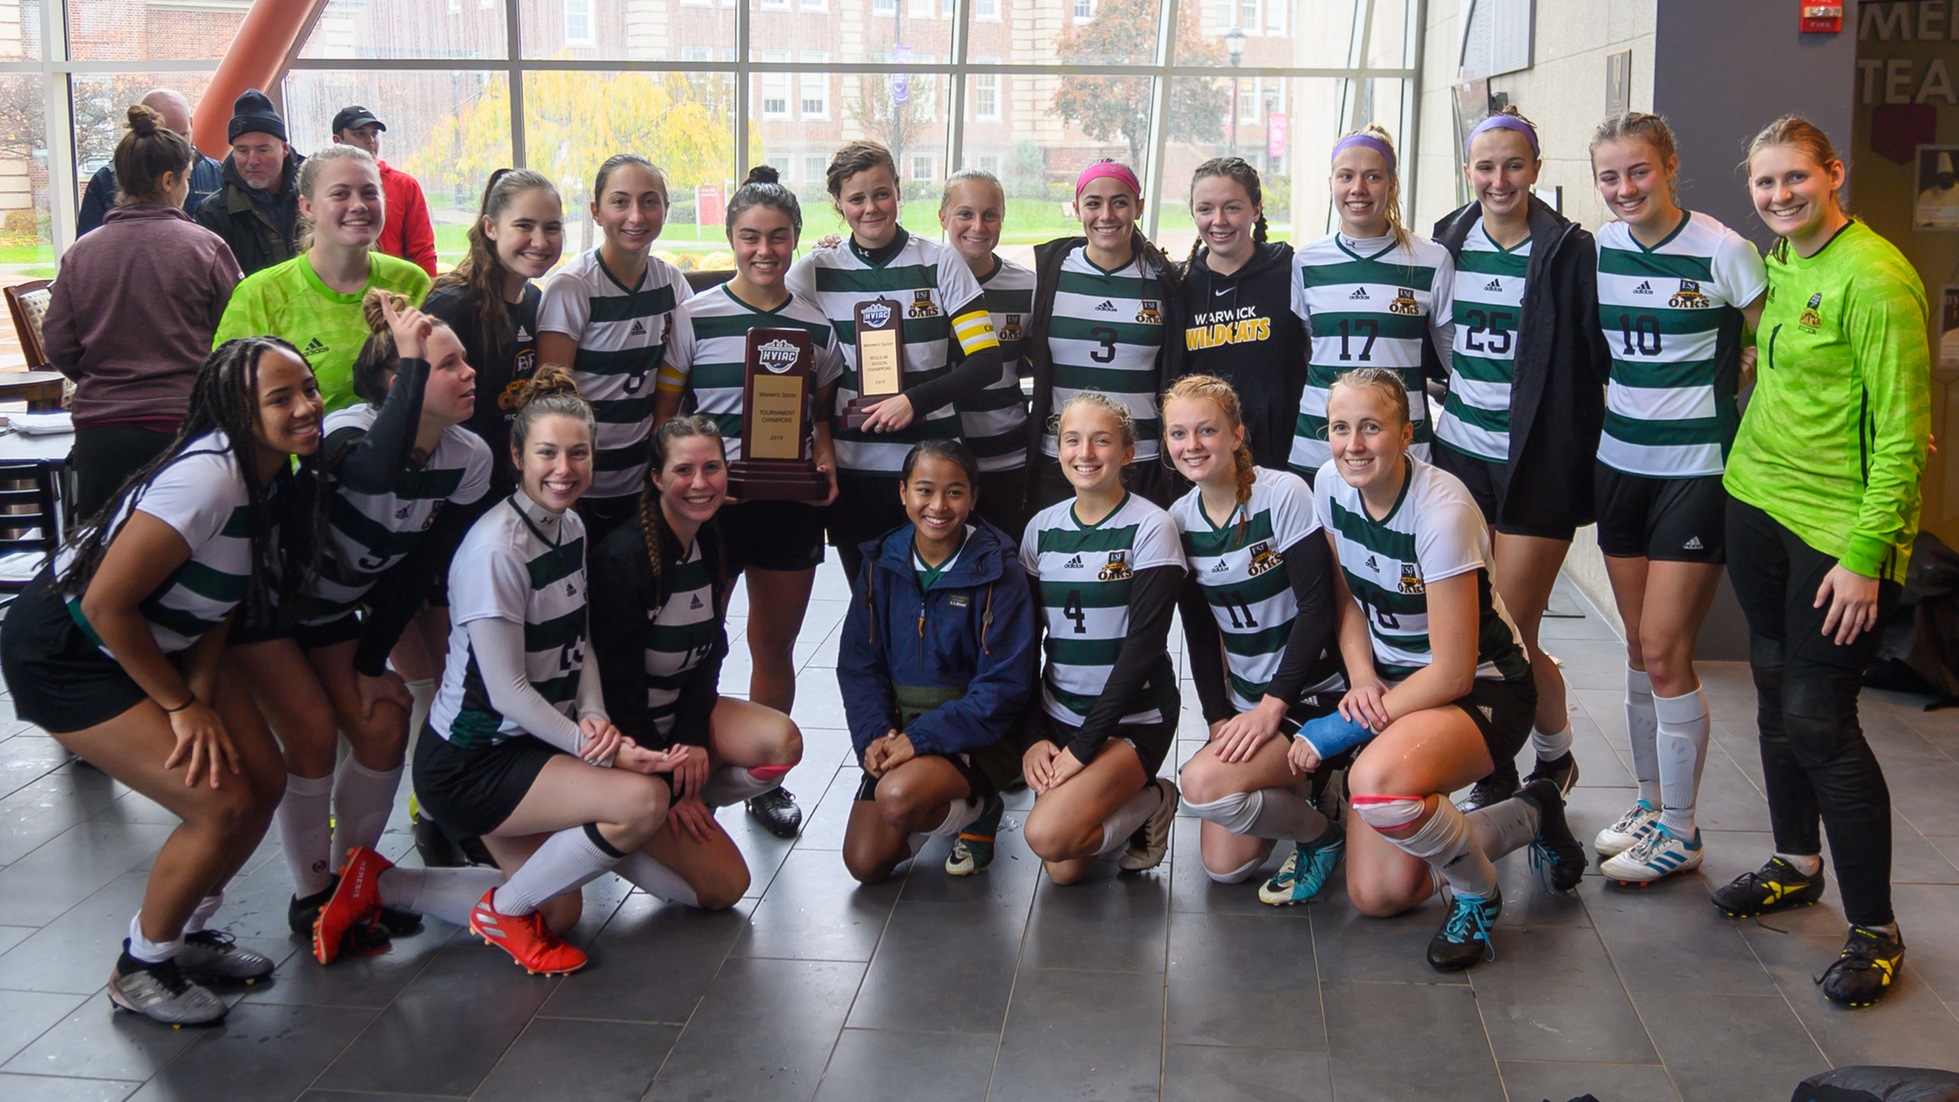 SUNY ESF Wins Fourth Straight Women's Soccer Title